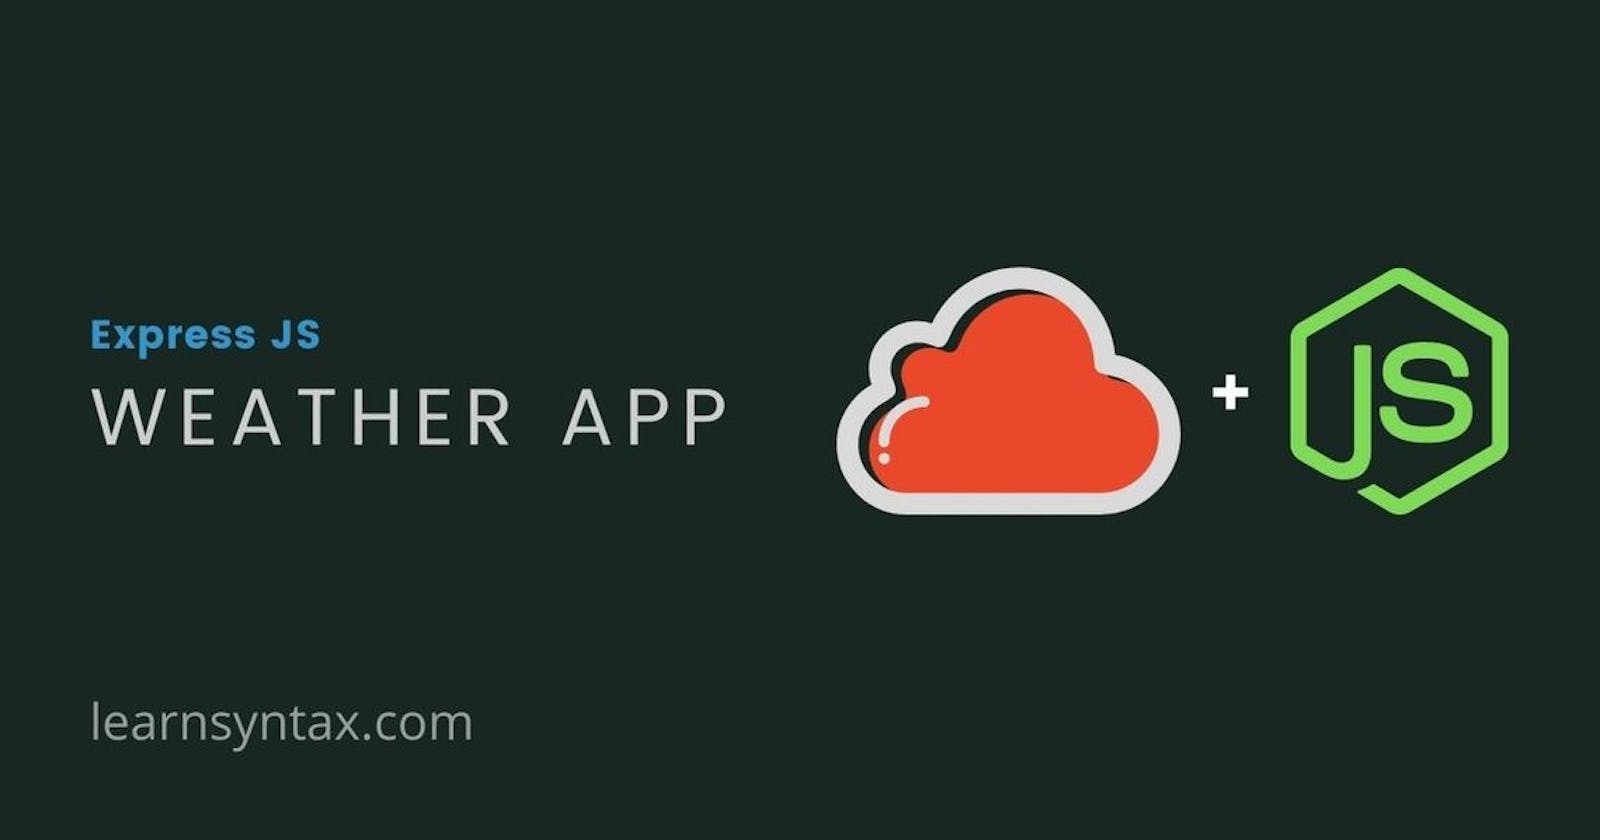 Creating a weather app in Express Js using OpenWeatherMap API